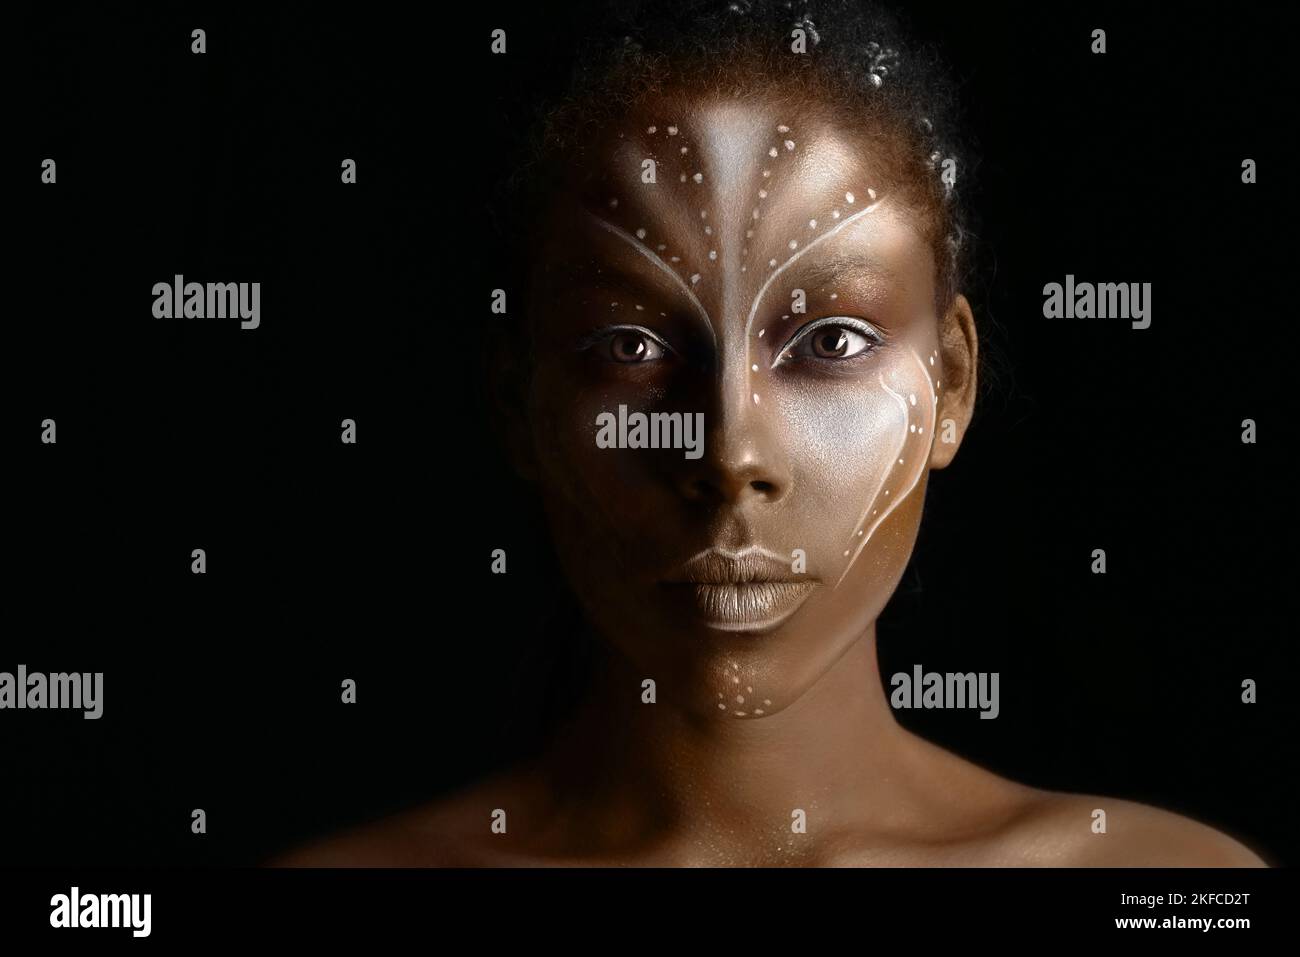 Art photo of Africal woman with tribal ethnic paintings on her face Stock Photo